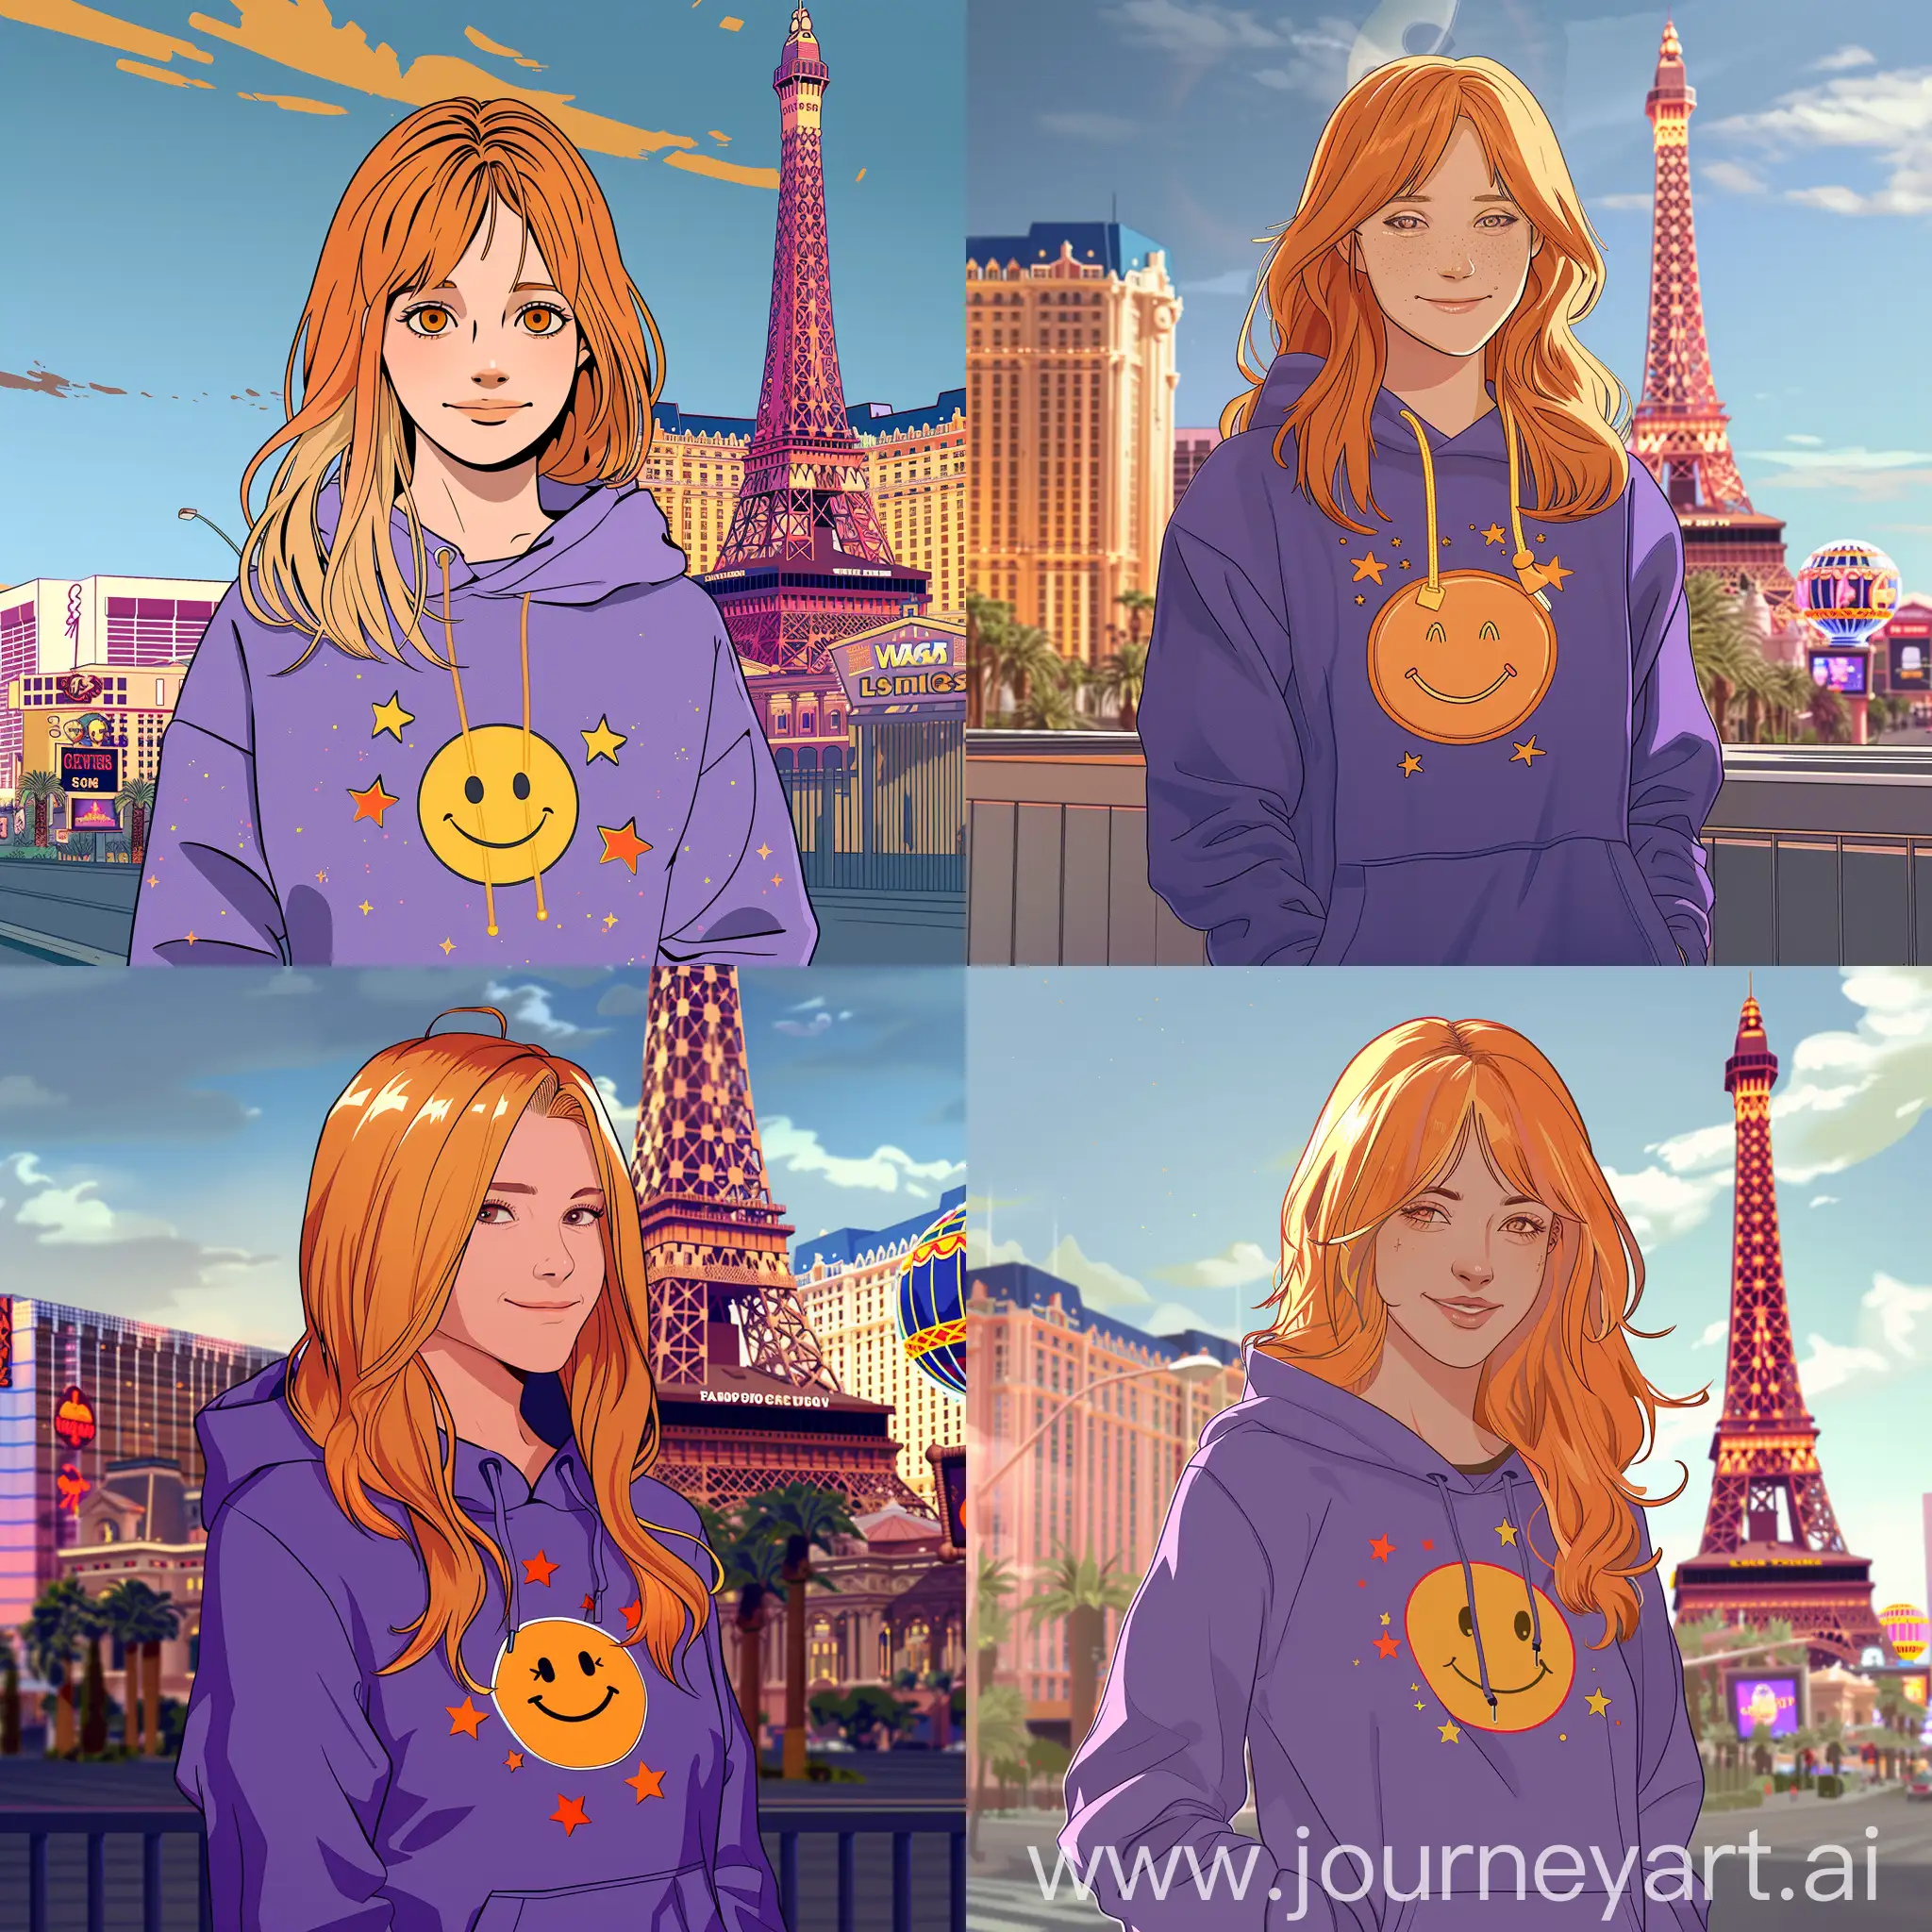 In the style of a saturday afternoon anime; hand drawn animated style. A young attractive 25 year old cute woman, long shoulder length hair that is very blonde on top and fades to light orange at the tips. She is wearing a purple hoodie with a yellow smiley face embroidered on it and orange stars. She is standing on the Los Vegas Strip, in the background you can see a large red casino, and the fake Ifle tower.